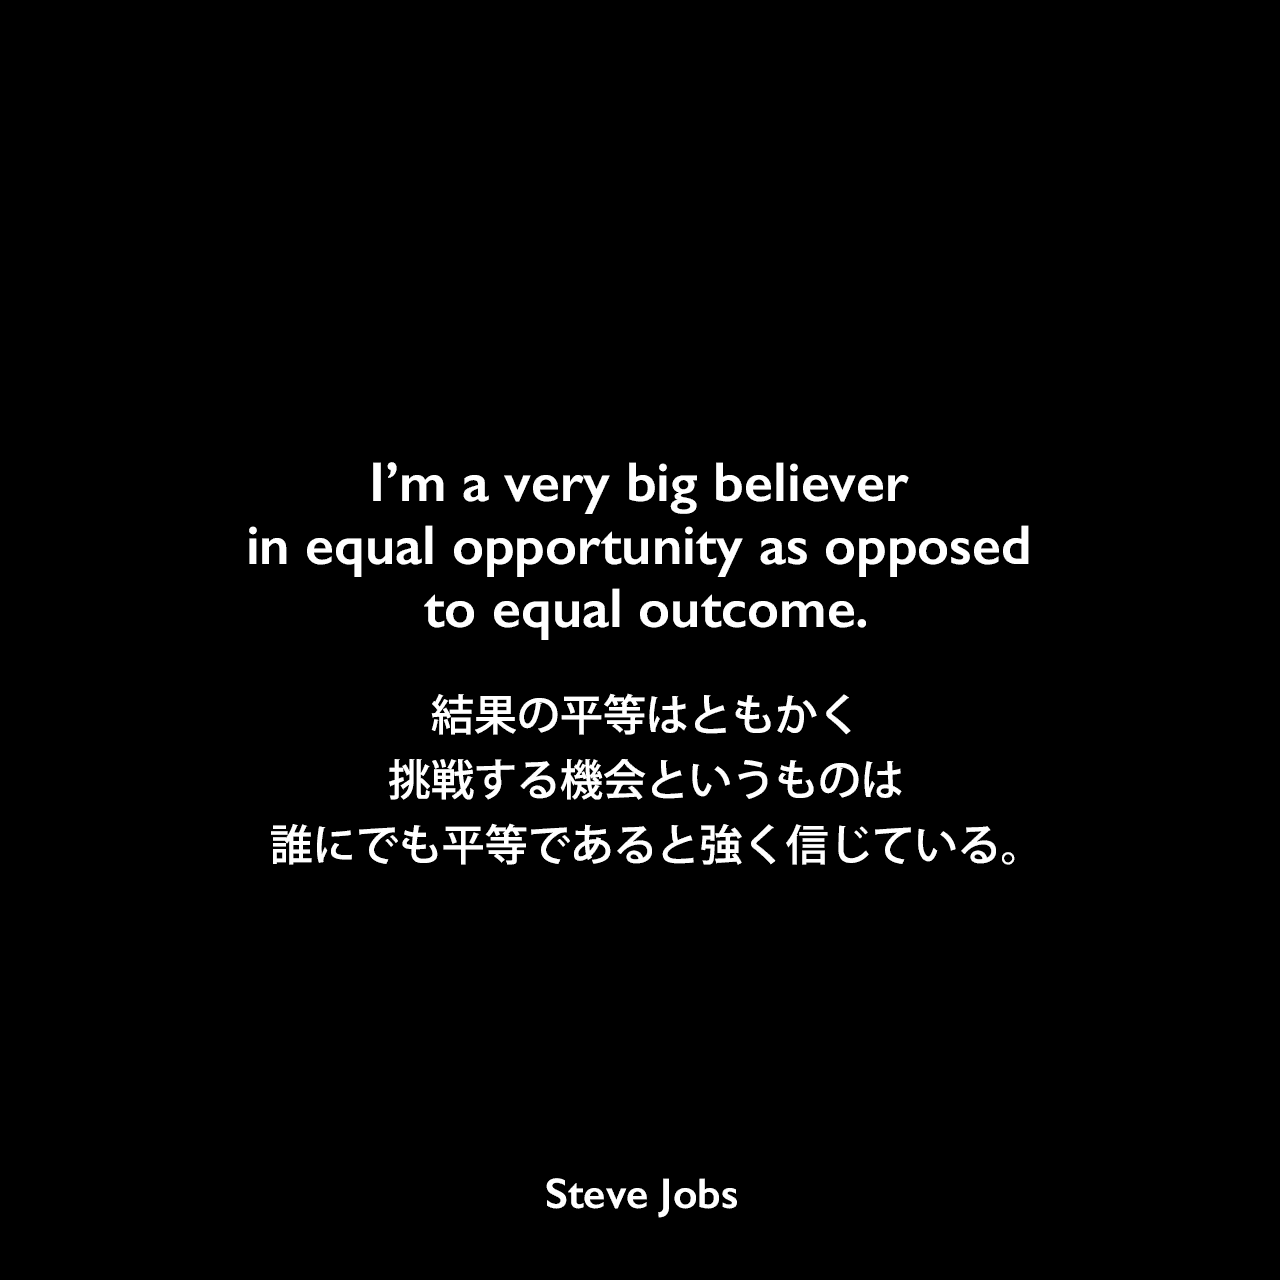 I’m a very big believer in equal opportunity as opposed to equal outcome.結果の平等はともかく、挑戦する機会というものは誰にでも平等であると強く信じている。